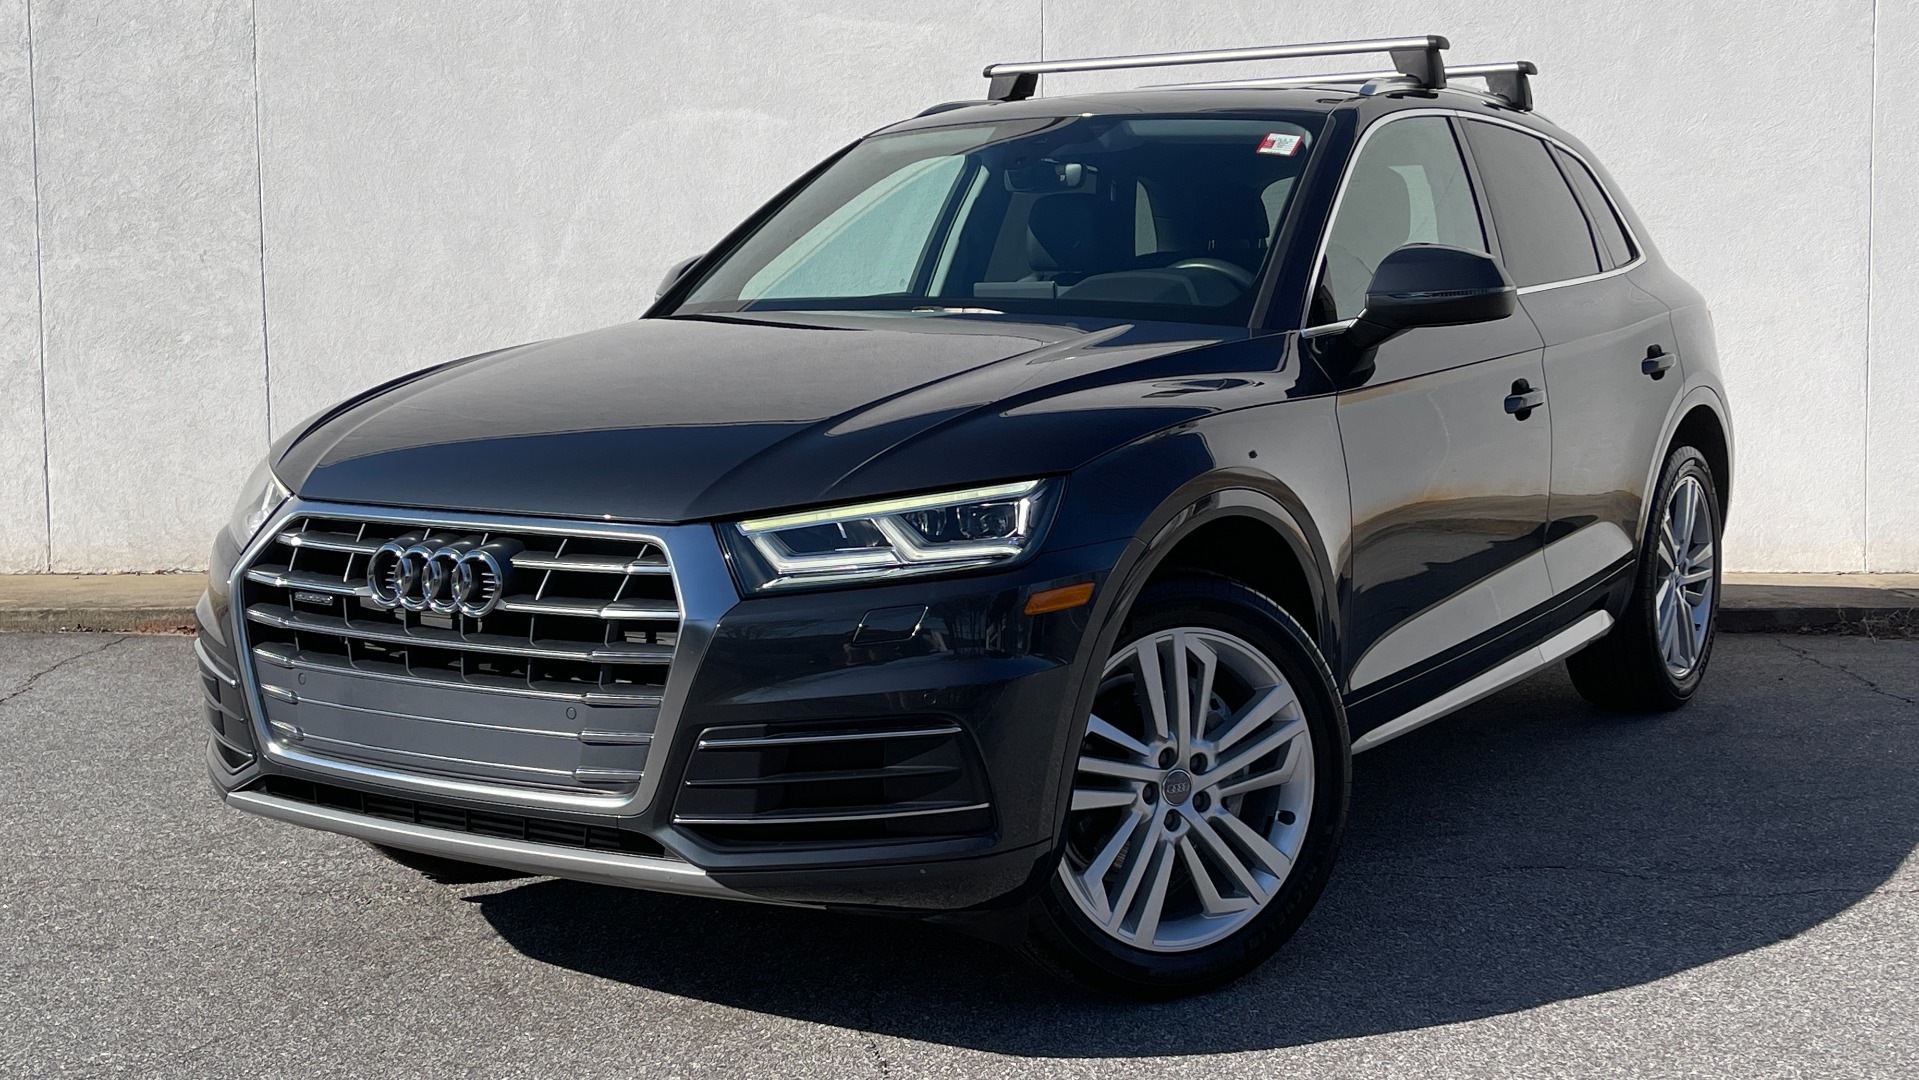 Used 2019 Audi Q5 PREMIUM PLUS / NAV / SUNROOF / WARM WTHR / PARK SYS PLUS / REARVIEW for sale $40,495 at Formula Imports in Charlotte NC 28227 2